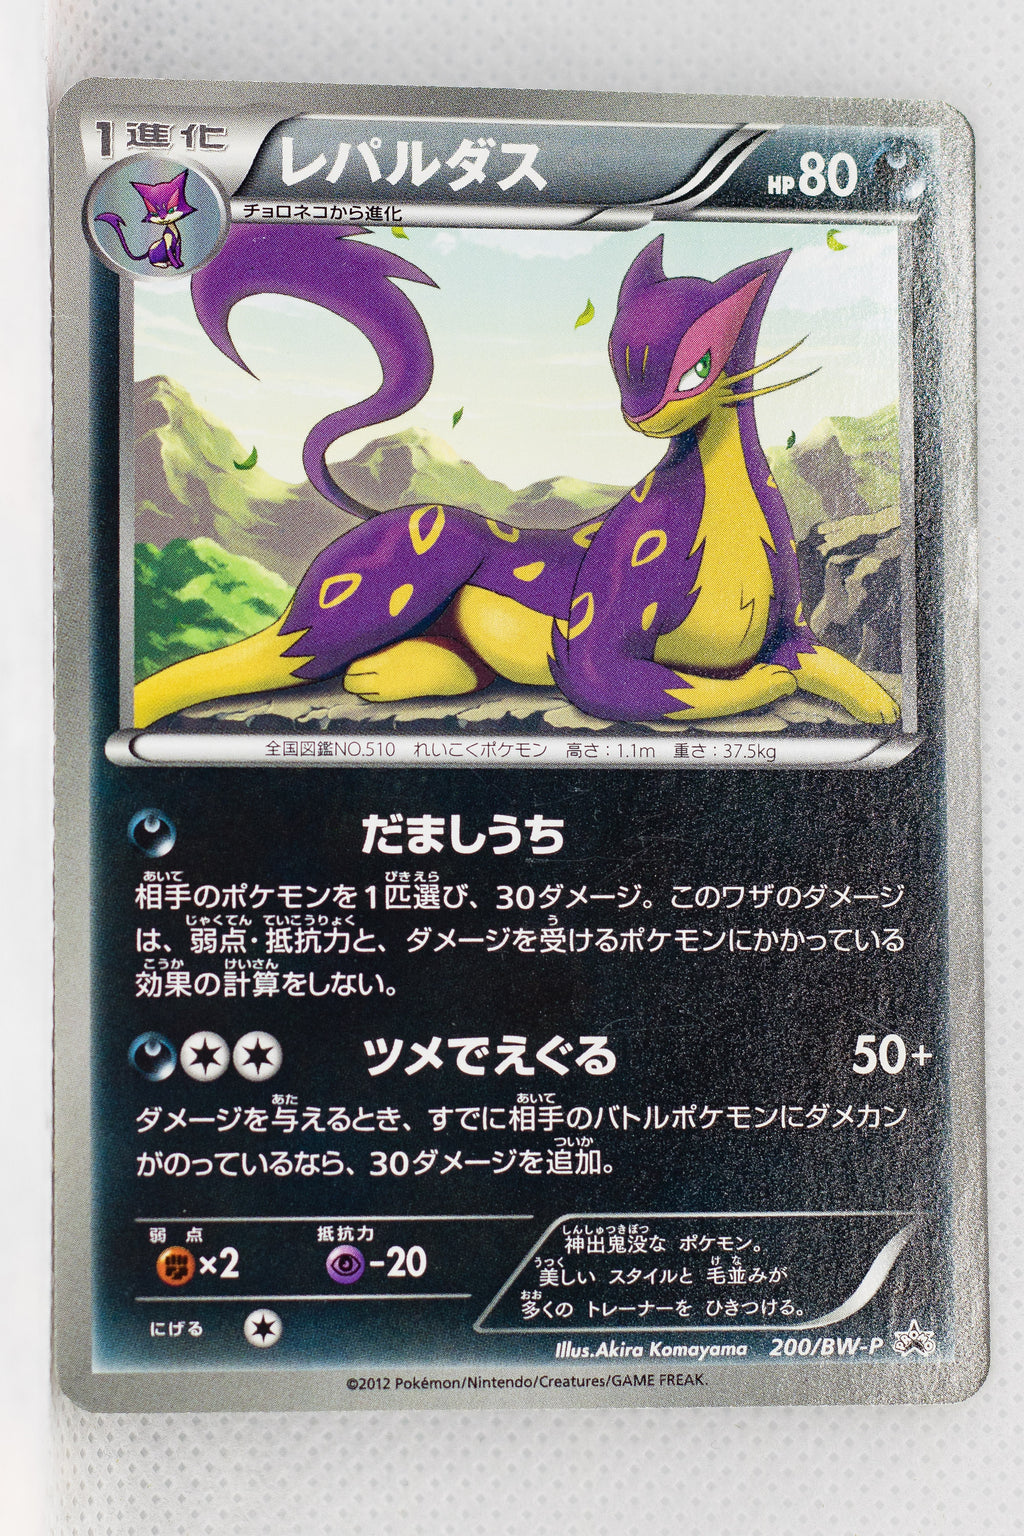 200/BW-P Liepard December 2012 7-11 Pack Campaign